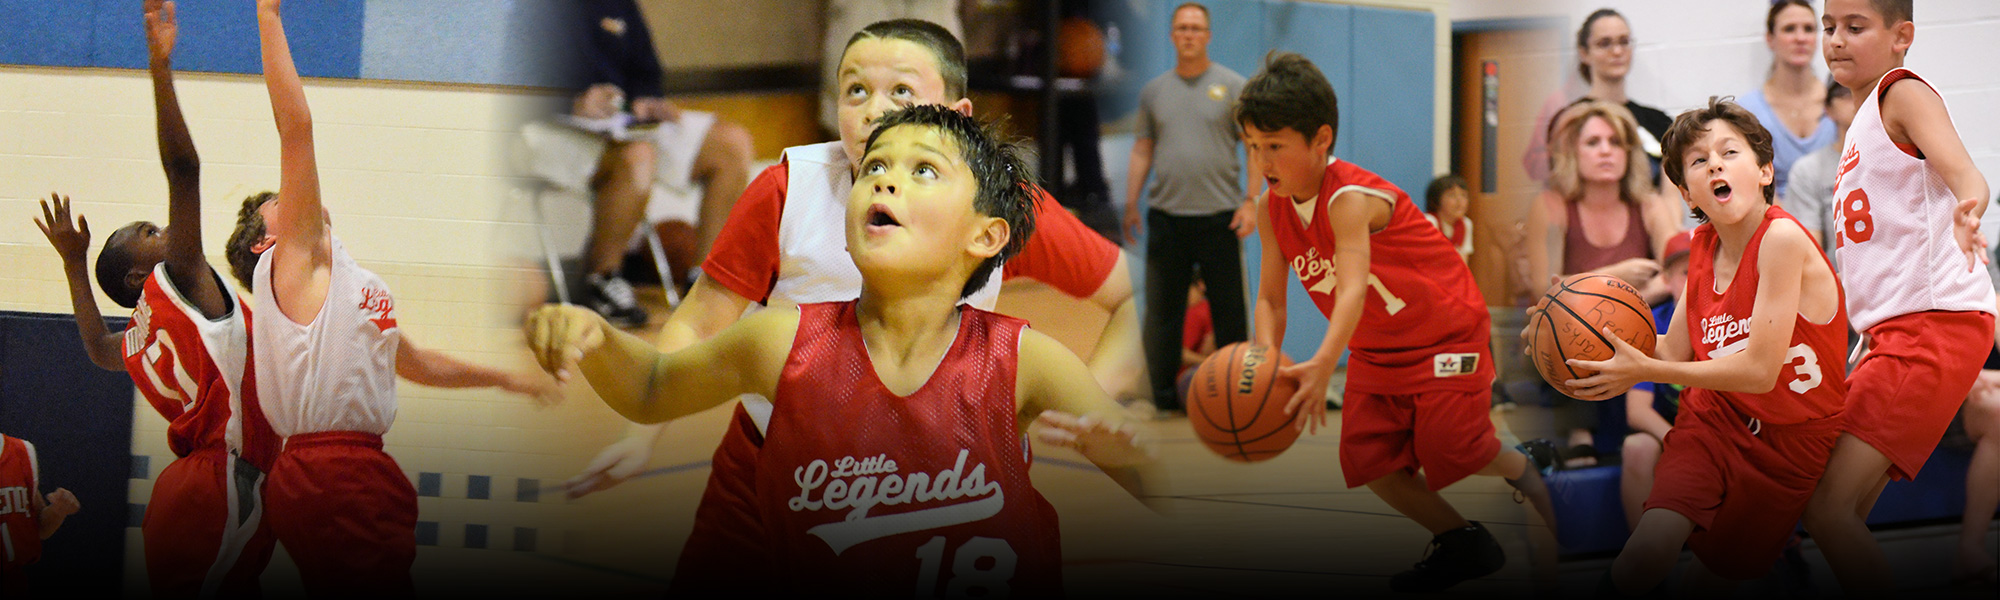 Legends Sports Leagues Youth Basketball